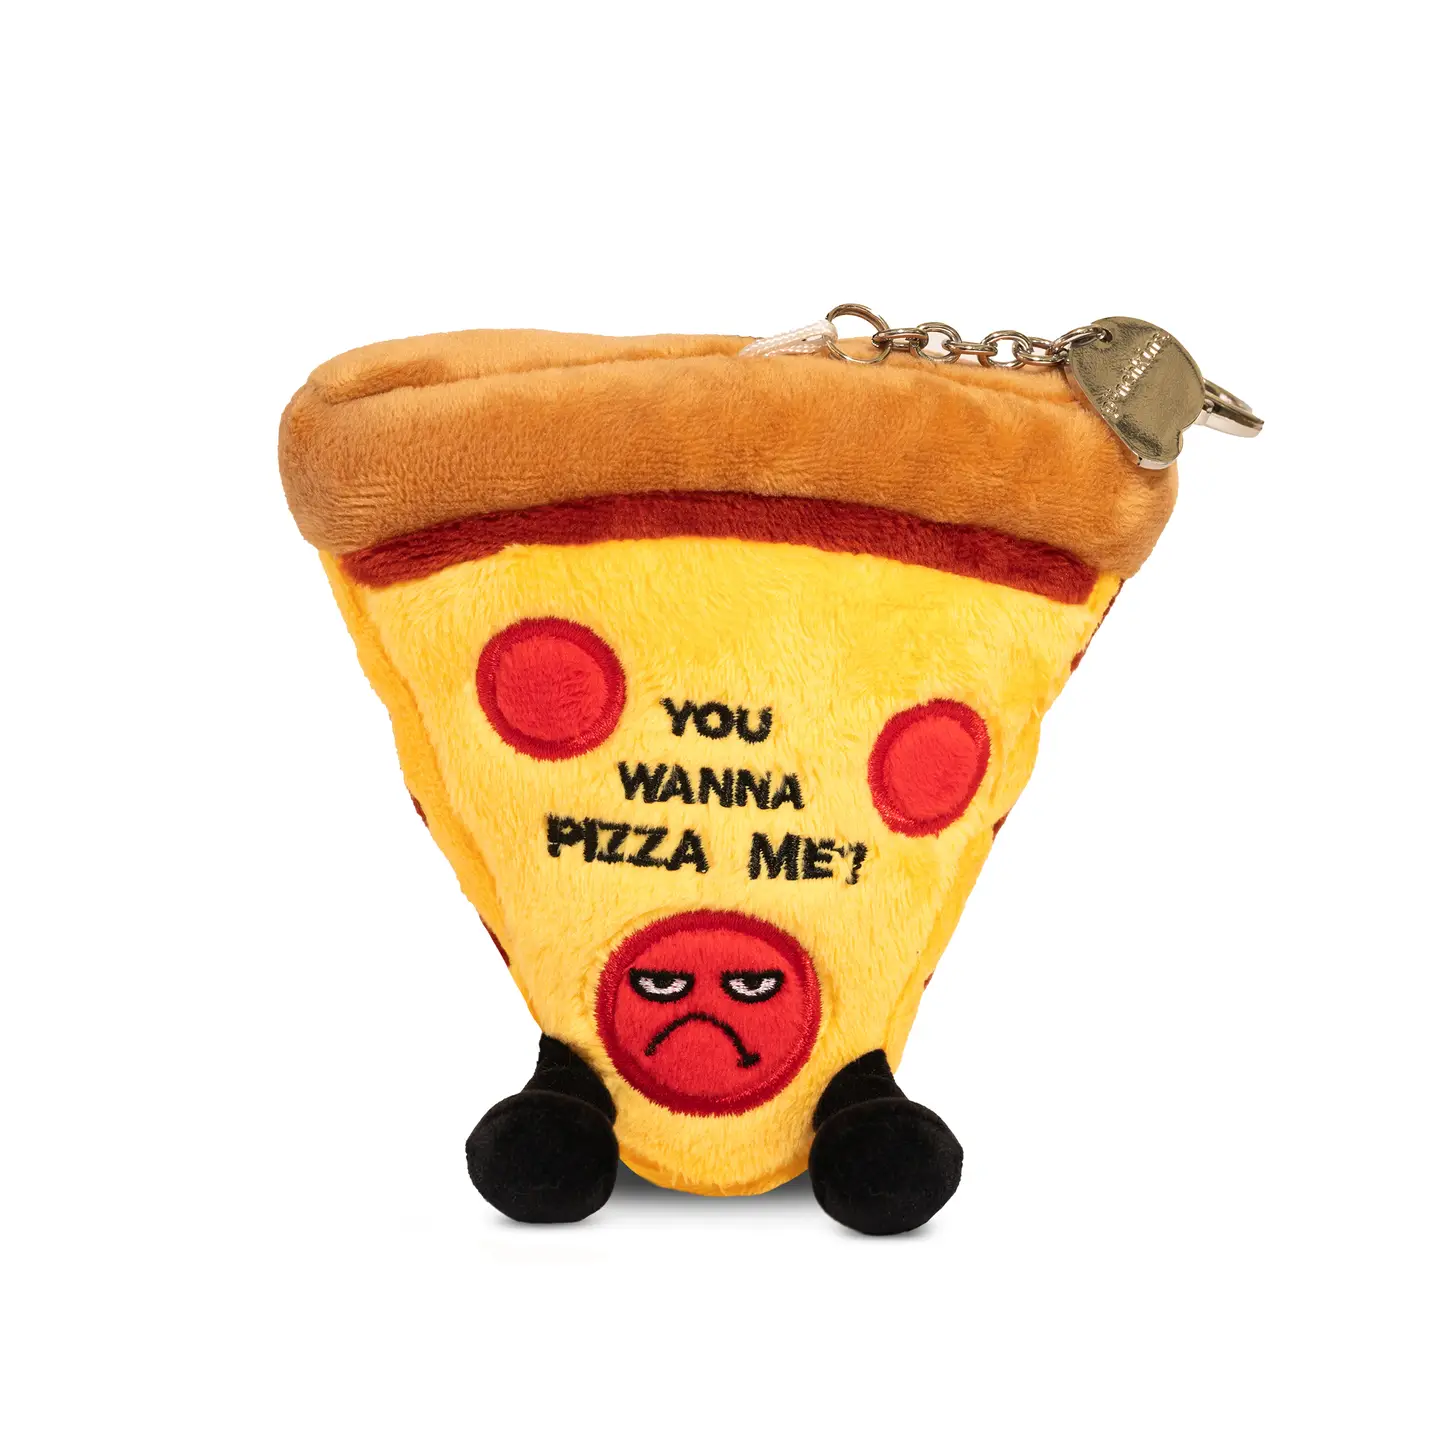 Crust me; you don’t want to mess with this plush, even if he is only bite-sized. His bothered expression is clear: You don’t want a pizza him! Yet his sauce line, 3D pepperoni pieces, and dangly legs somehow make him a-dough-able. No matter how you slice it, this pestered pepperoni pizza would make the perfect accent piece for any backpack or bag.